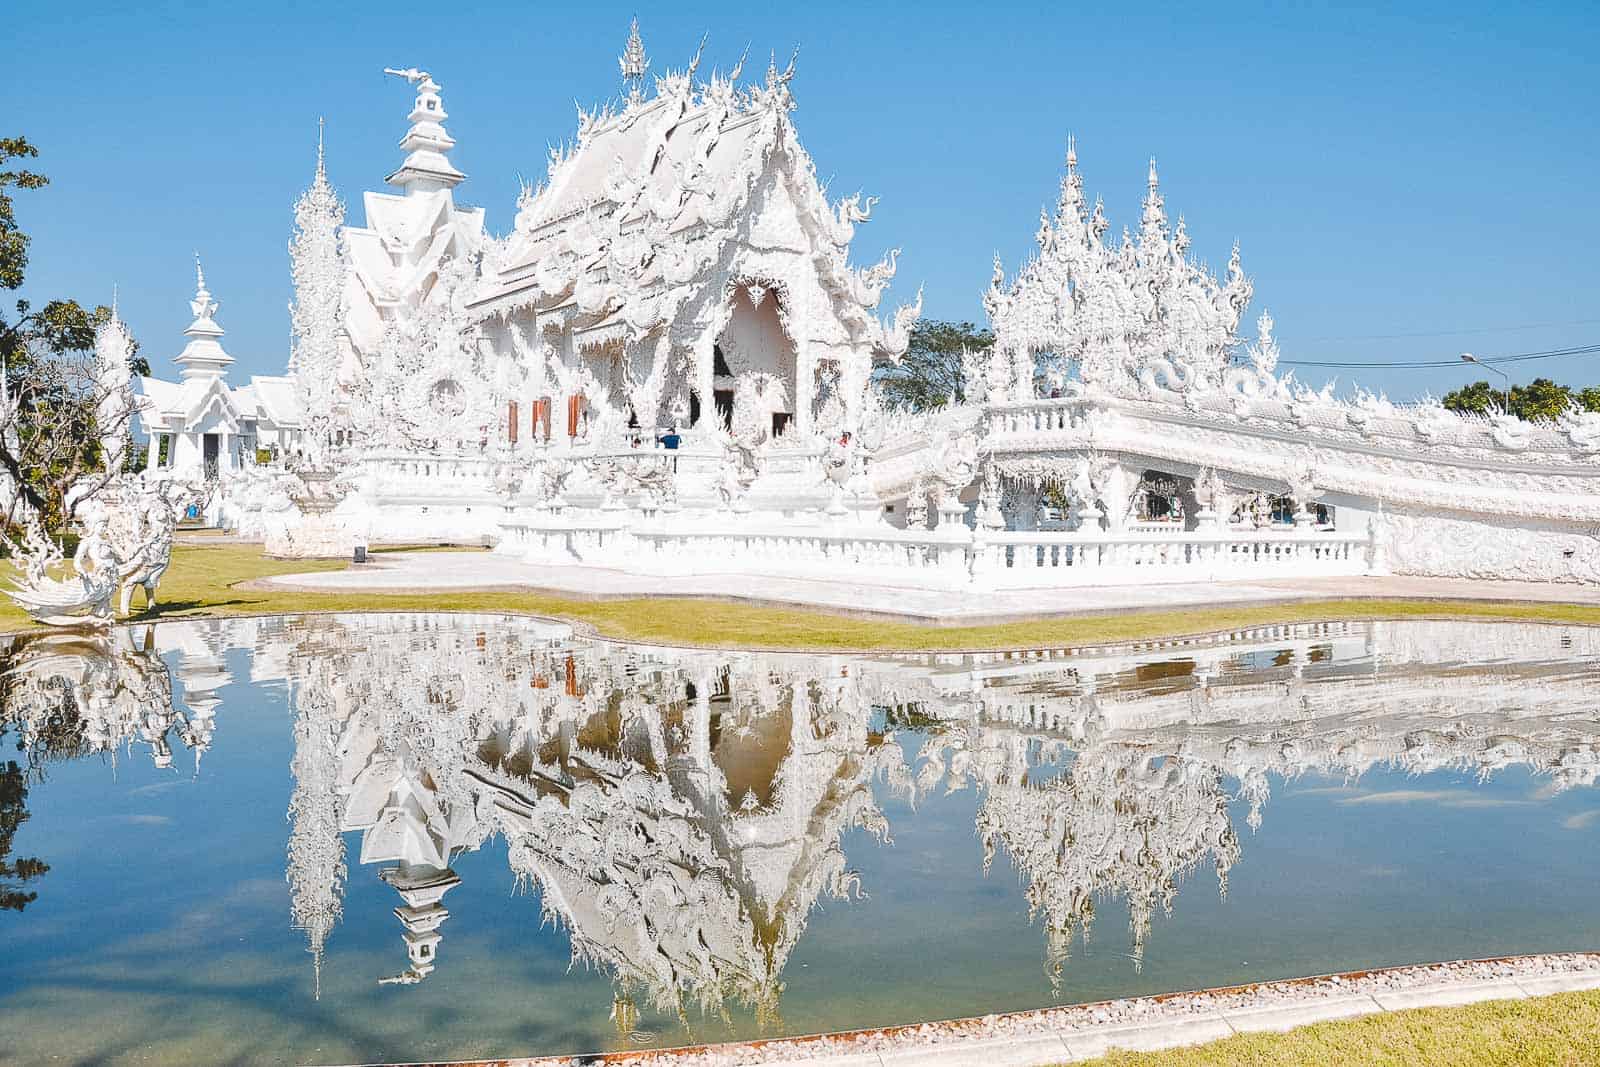 Wat-Rong-Khun-or-the-white-temple-in-Chiang-rai-province-thailand-1